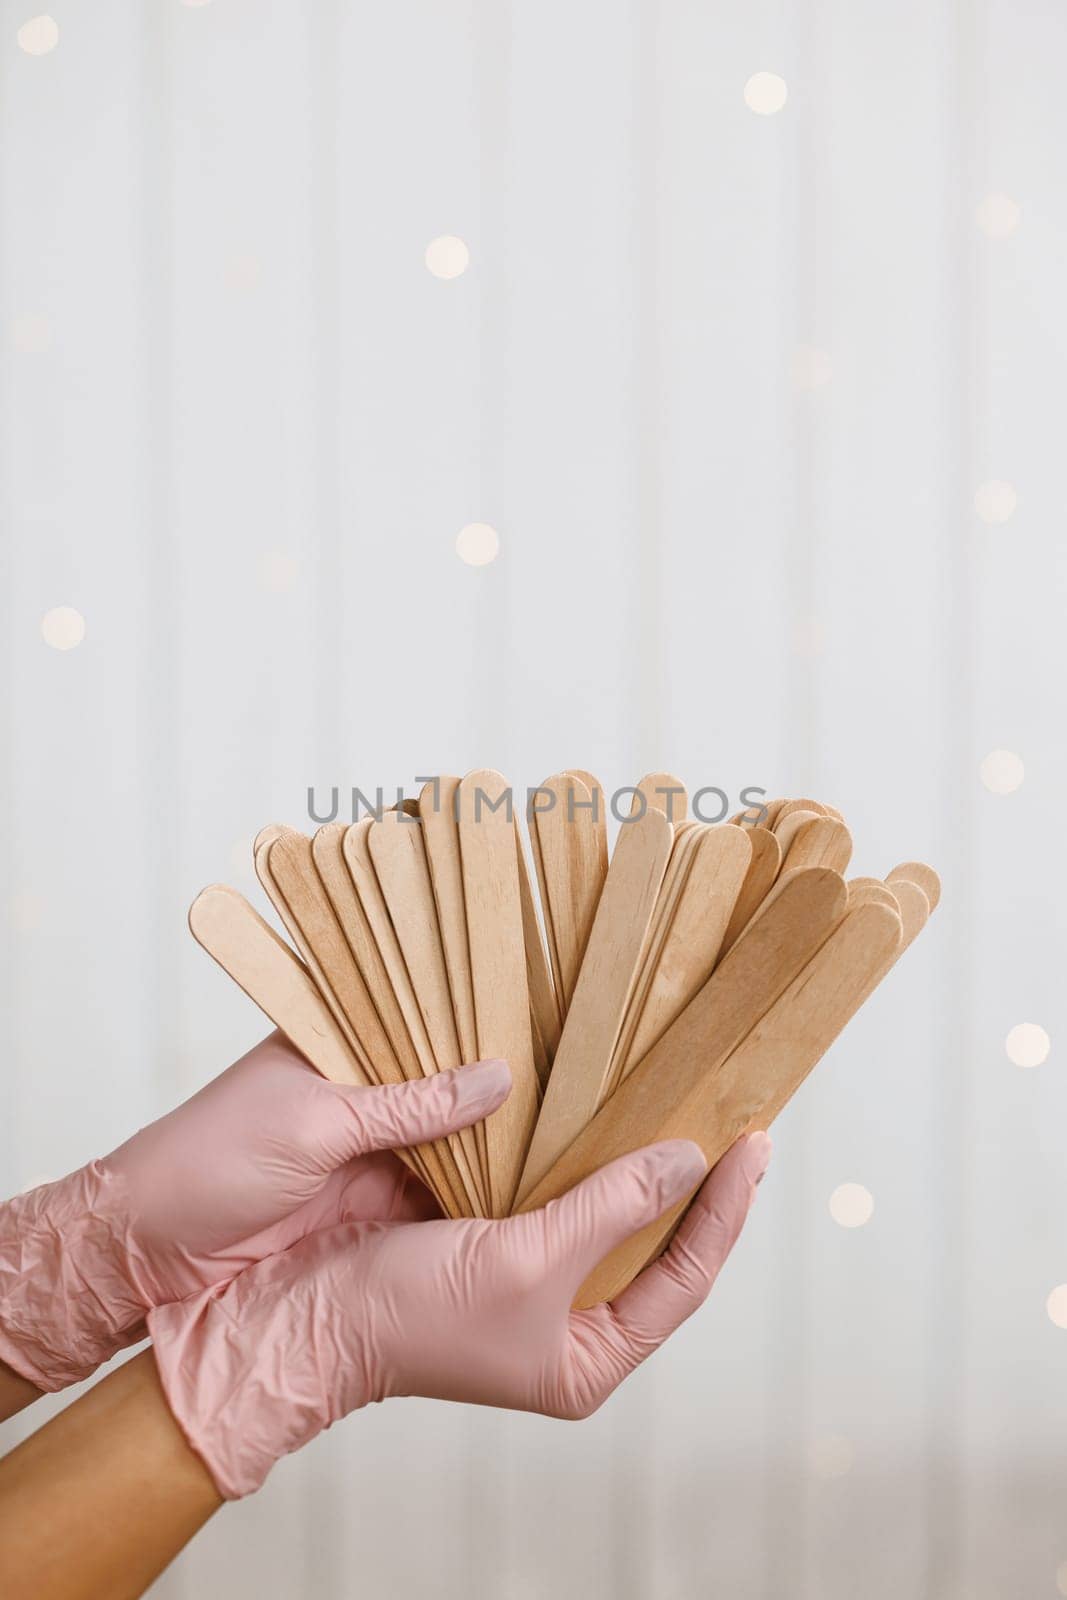 Woman holding many wax wooden spatulas. The young woman is wearing beige clothing and in pink medical gloves. The concept of depilation, waxing, sugaring smooth skin without hair, banner, copy space